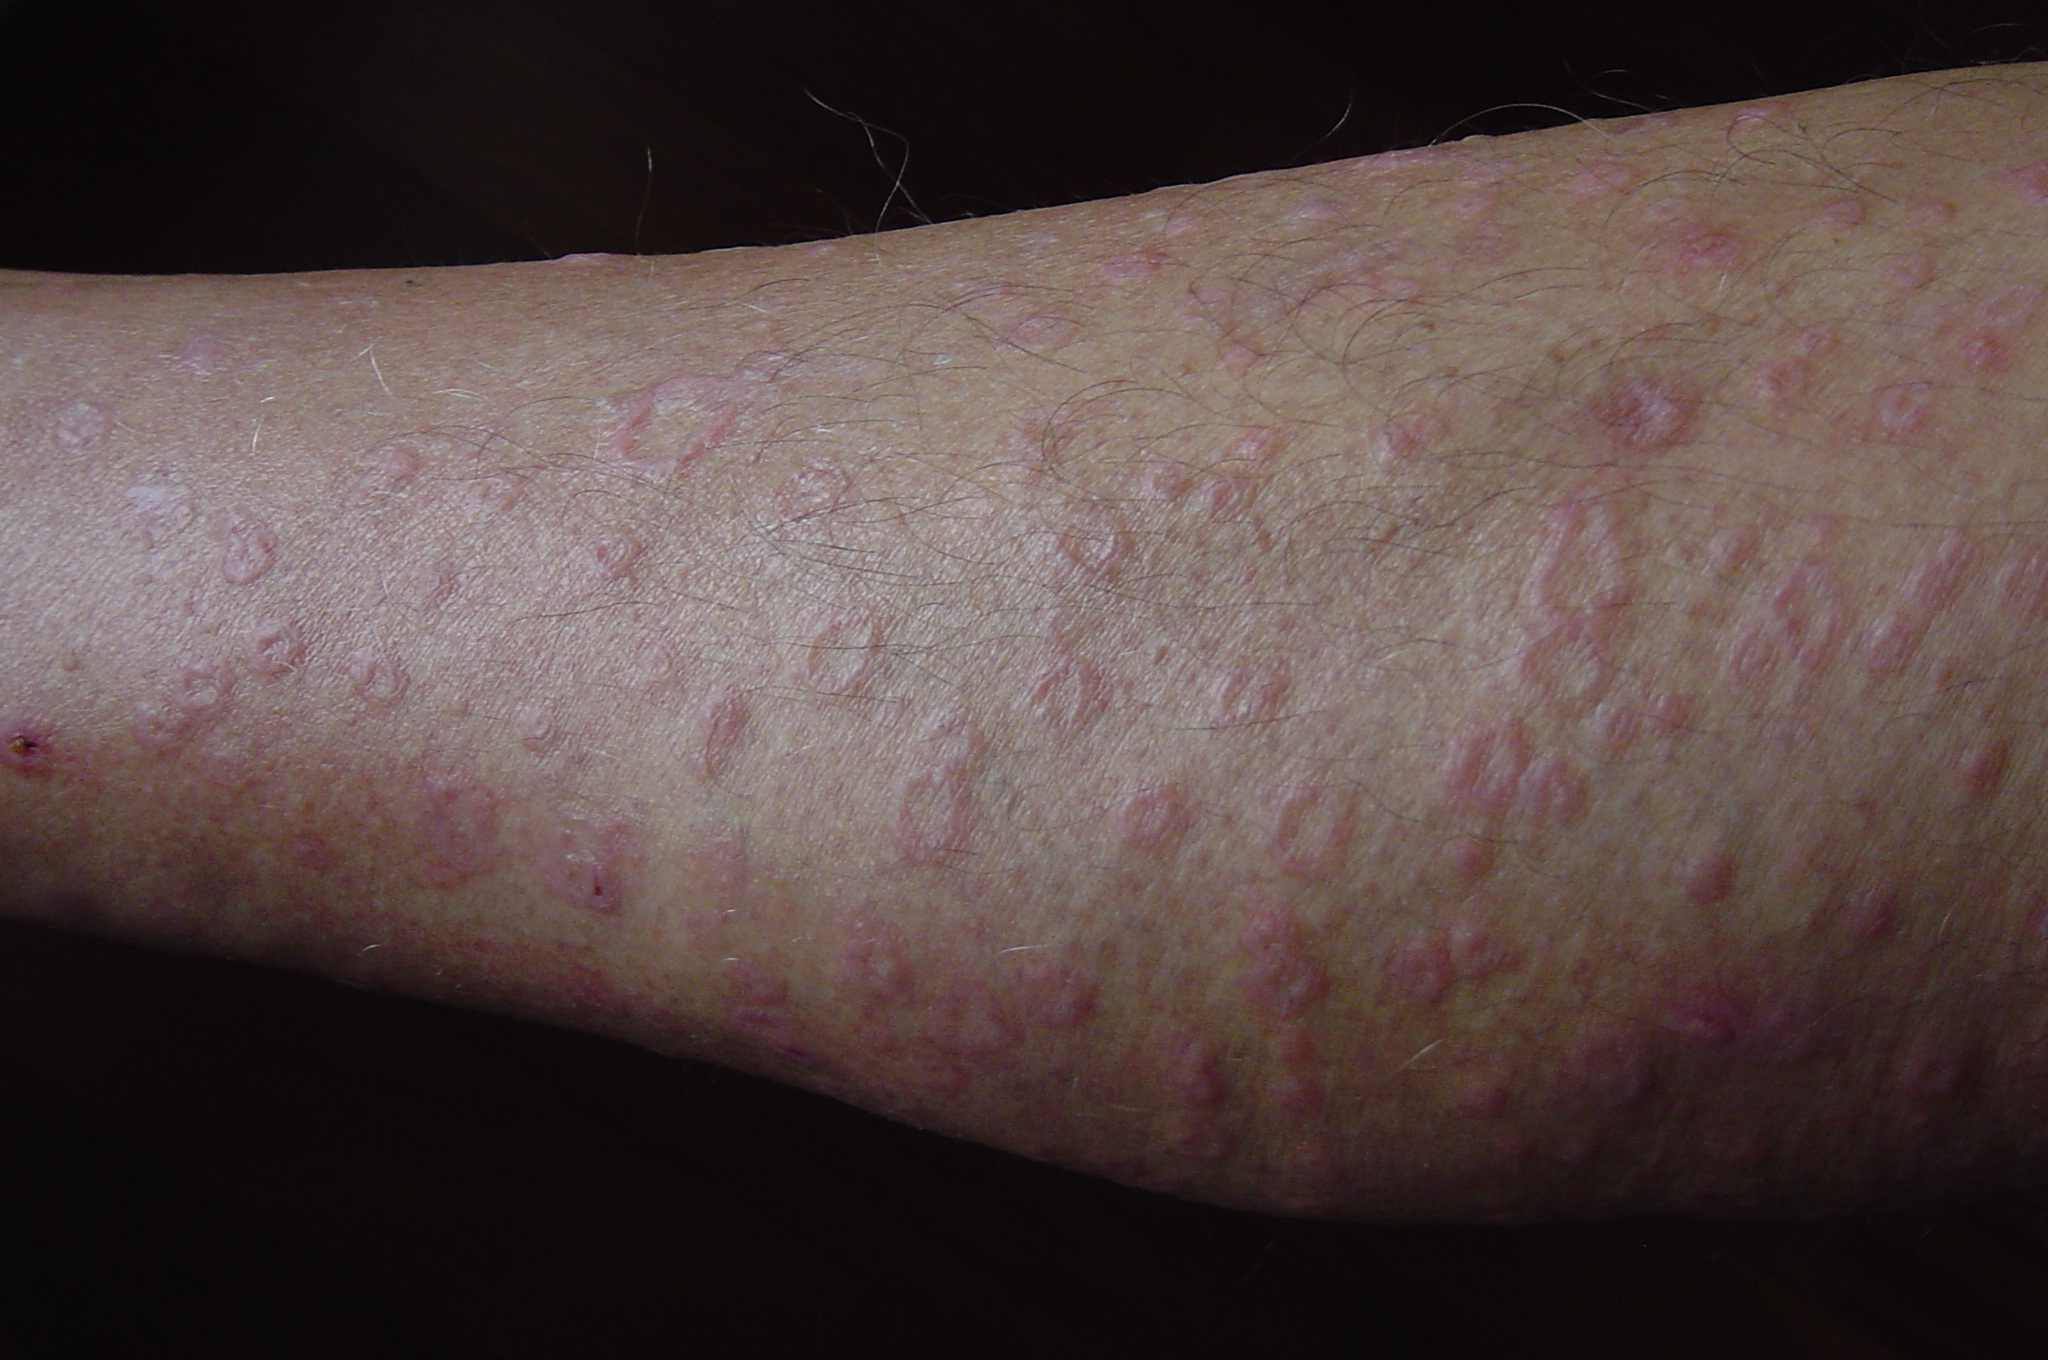 Itchy Rash On Legs What Causes Rashes On Skin Of Legs - vrogue.co